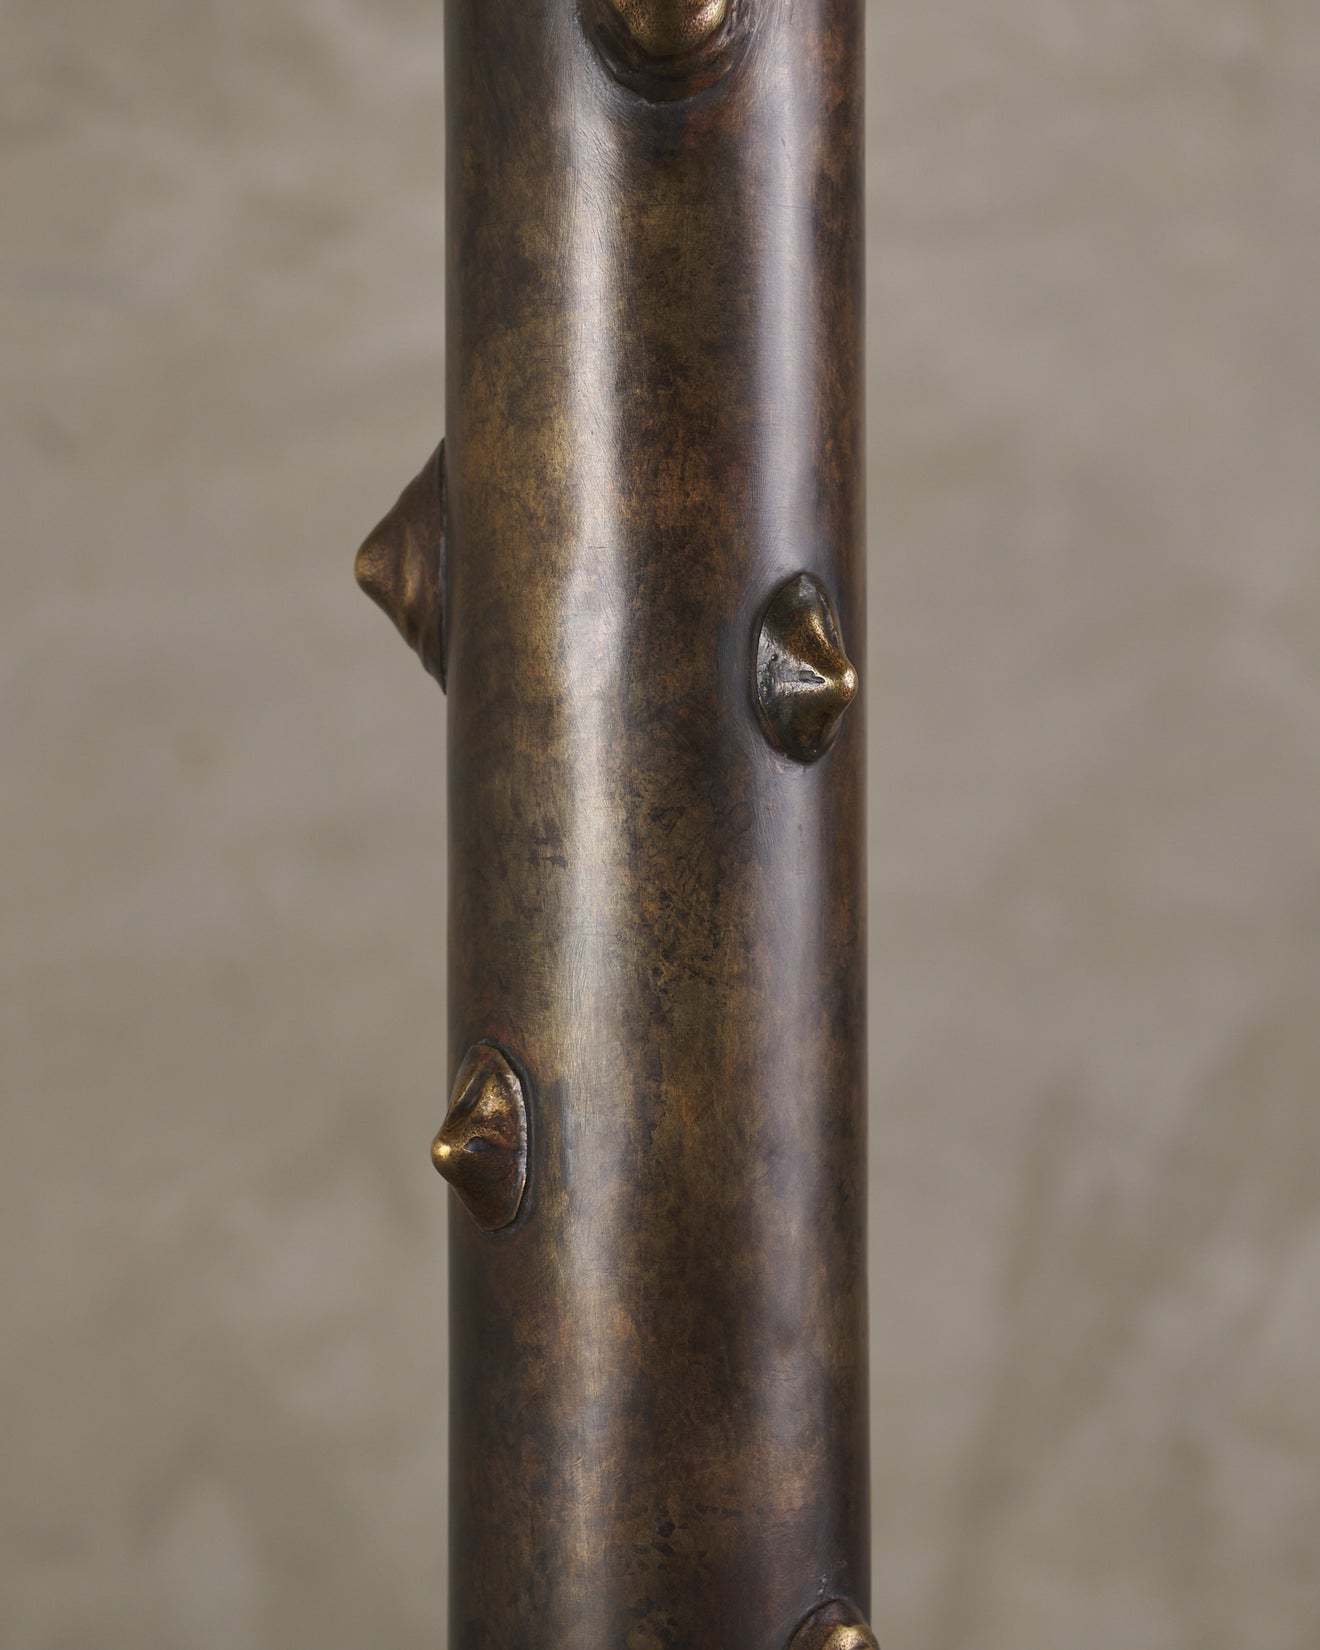 PINACULO FLOOR LAMP BY THIERRY JEANNOT